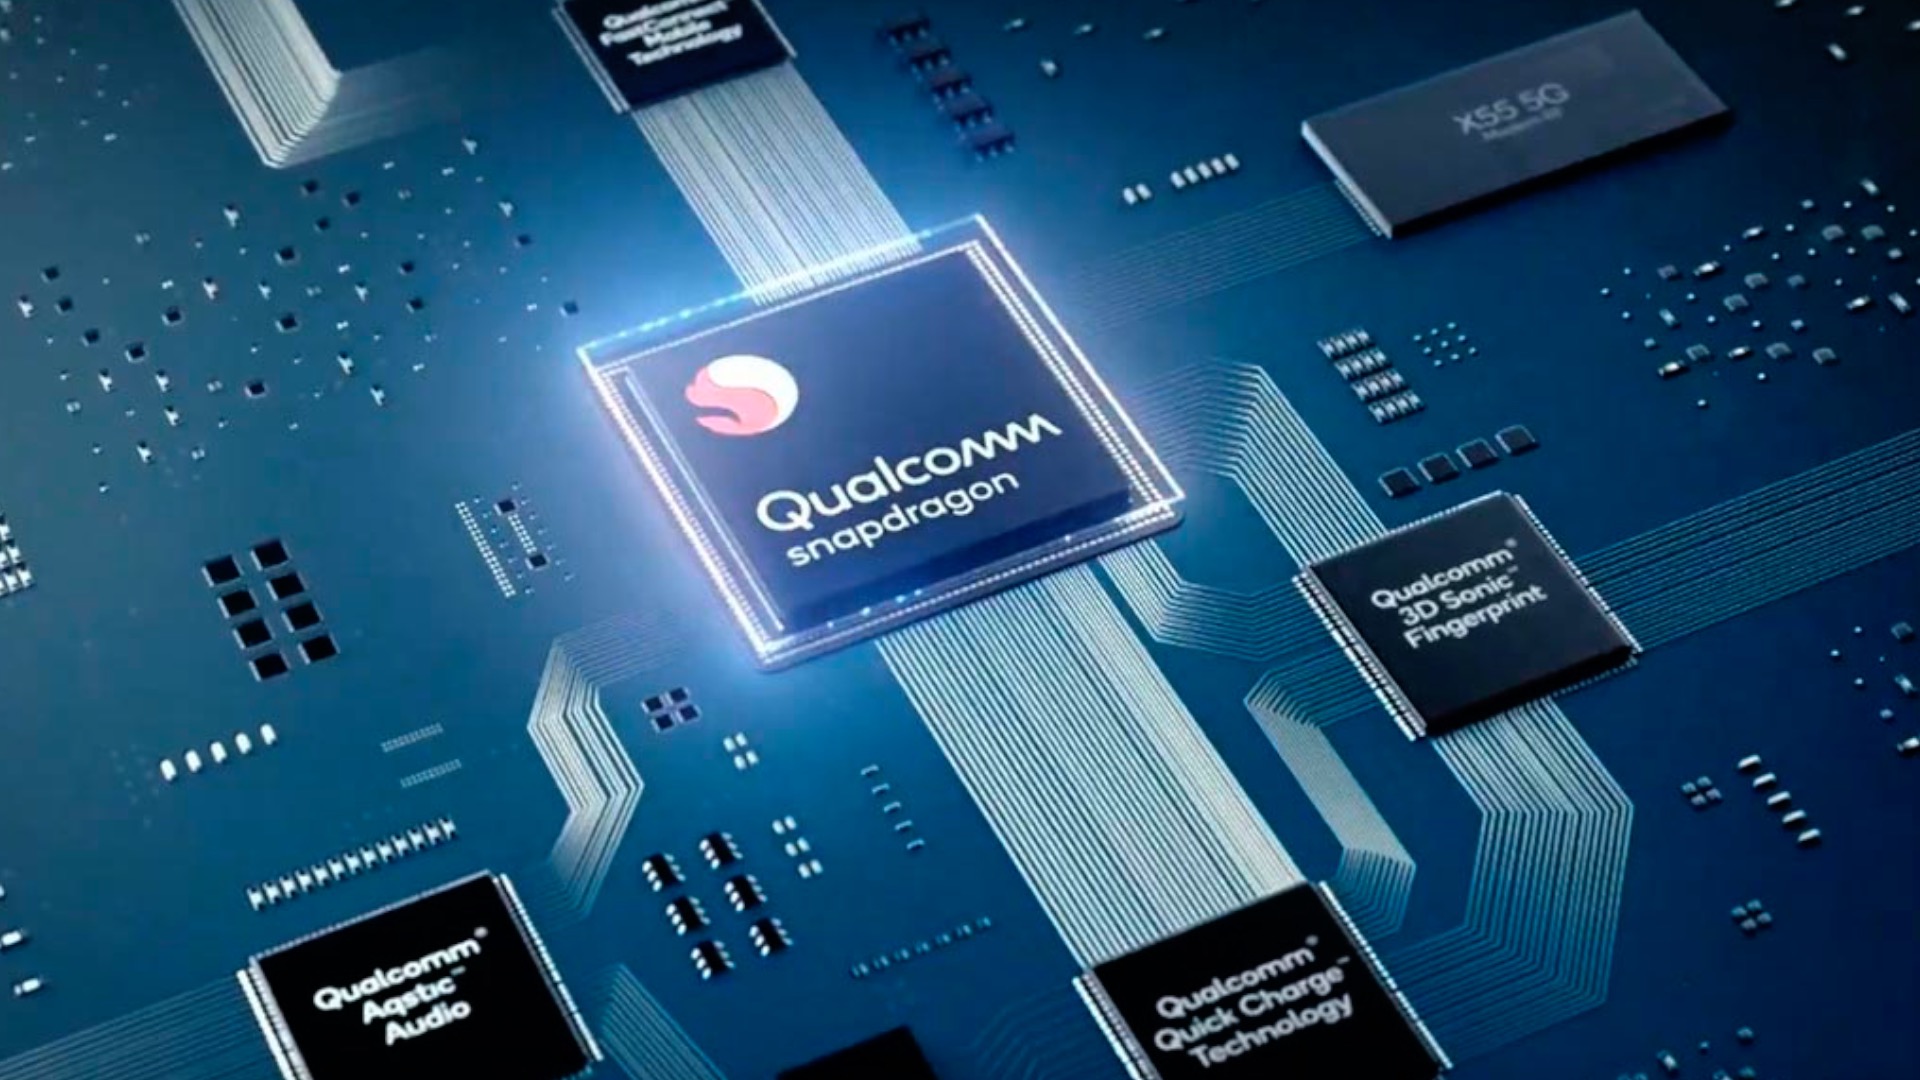 MediaTek and rigged benchmarks: Qualcomm has a big voice